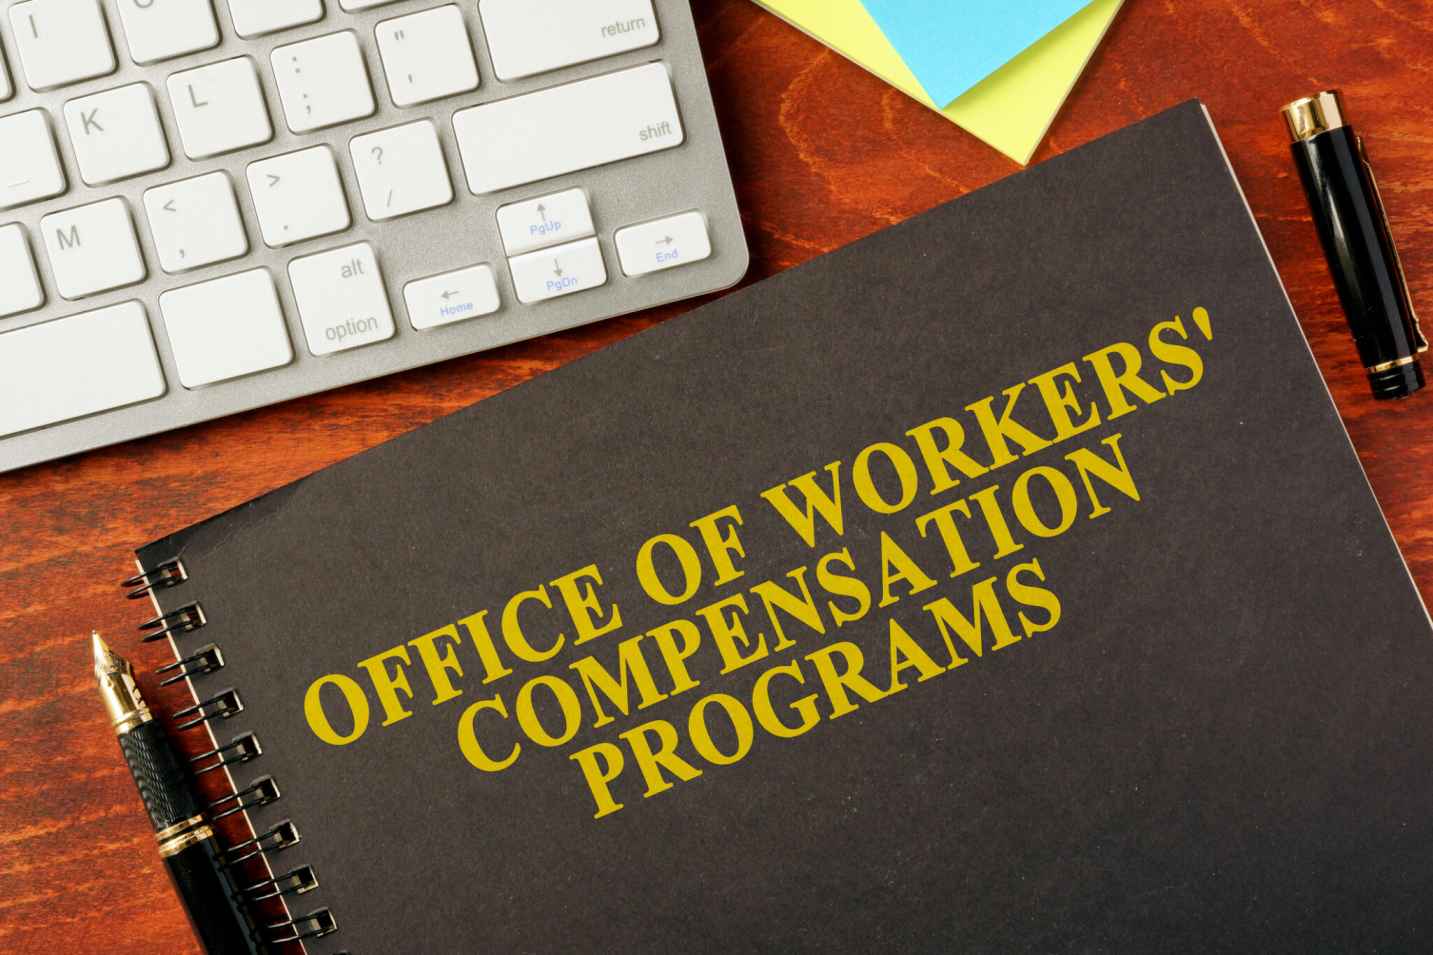 Office of workers compensation programs in Maryland & Cherry Hills, USA